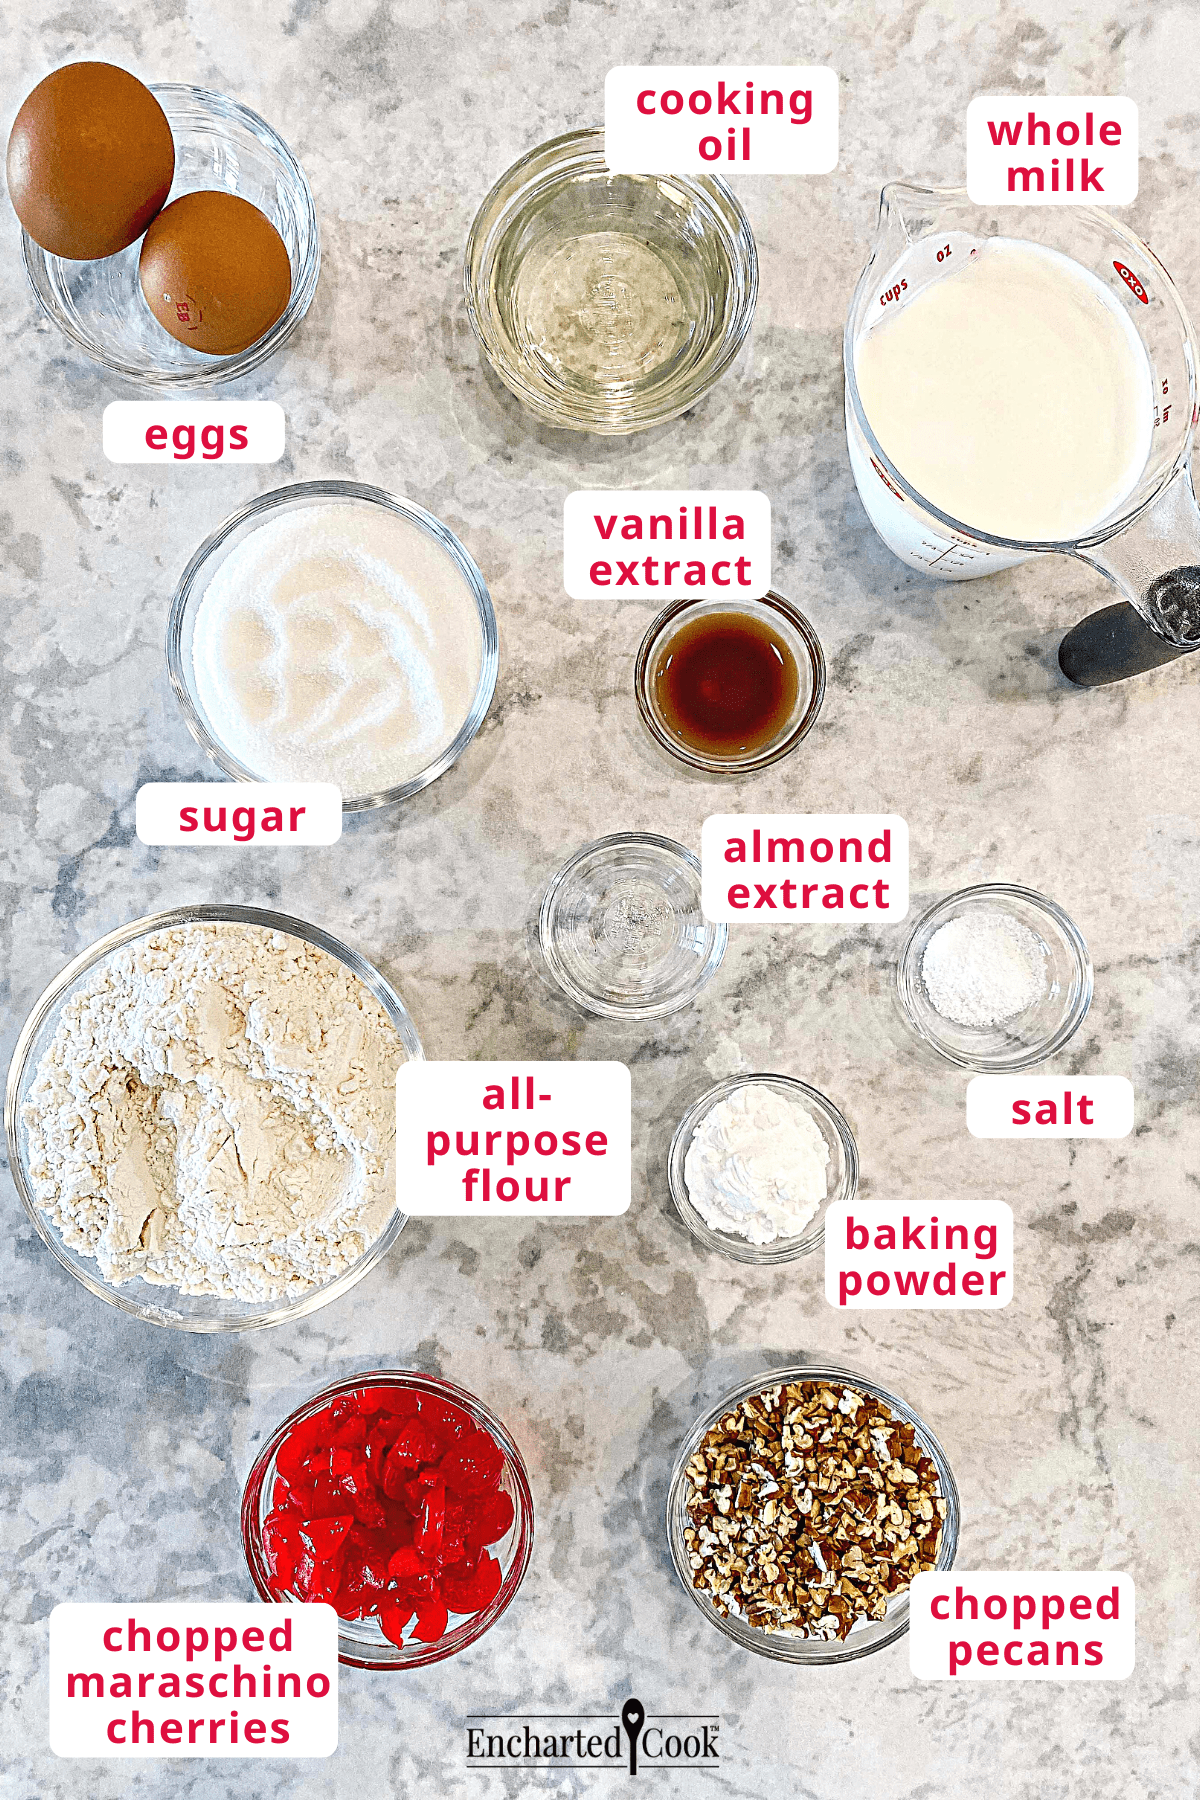 The ingredients, clockwise from top left: eggs, cooking oil, whole milk, vanilla extract, almond extract, salt, baking powder, chopped pecans, chopped maraschino cherries, all purpose flour, and sugar.